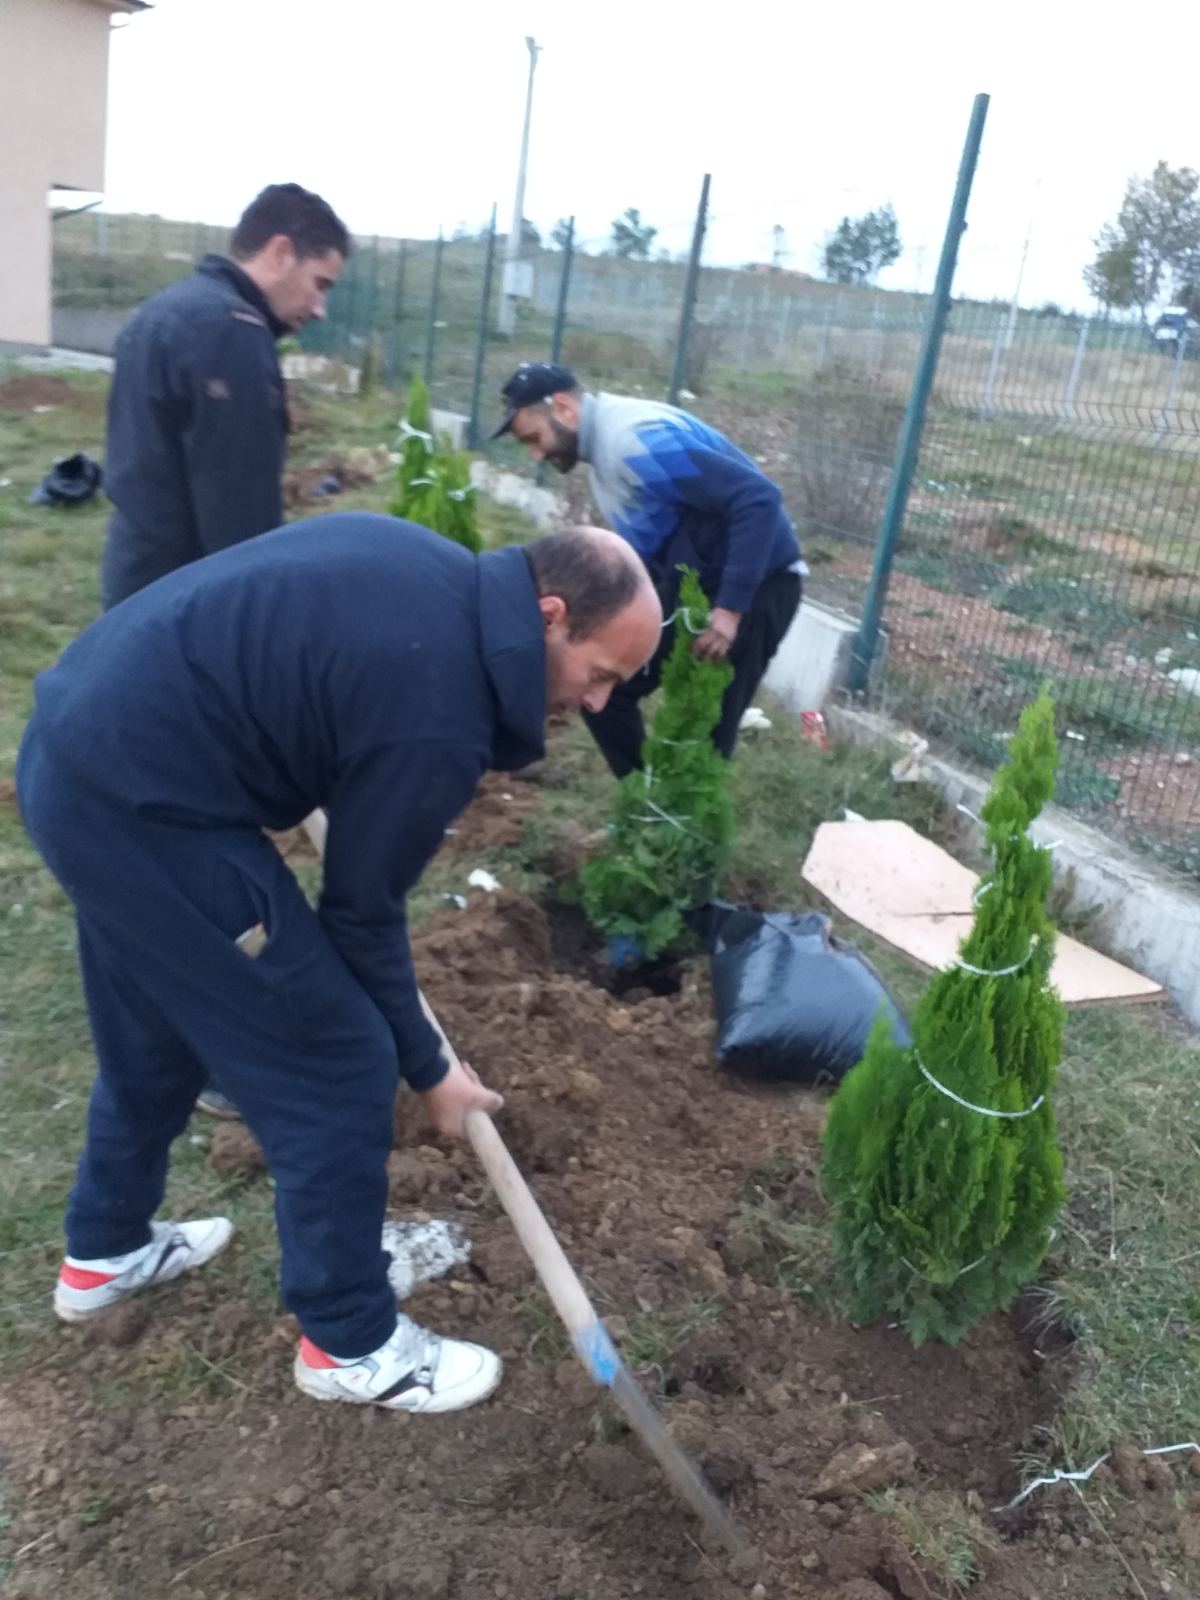 A joint action undertaken by both employees and migrants for the planting of 70 trees in the Tutin Asylum Centre